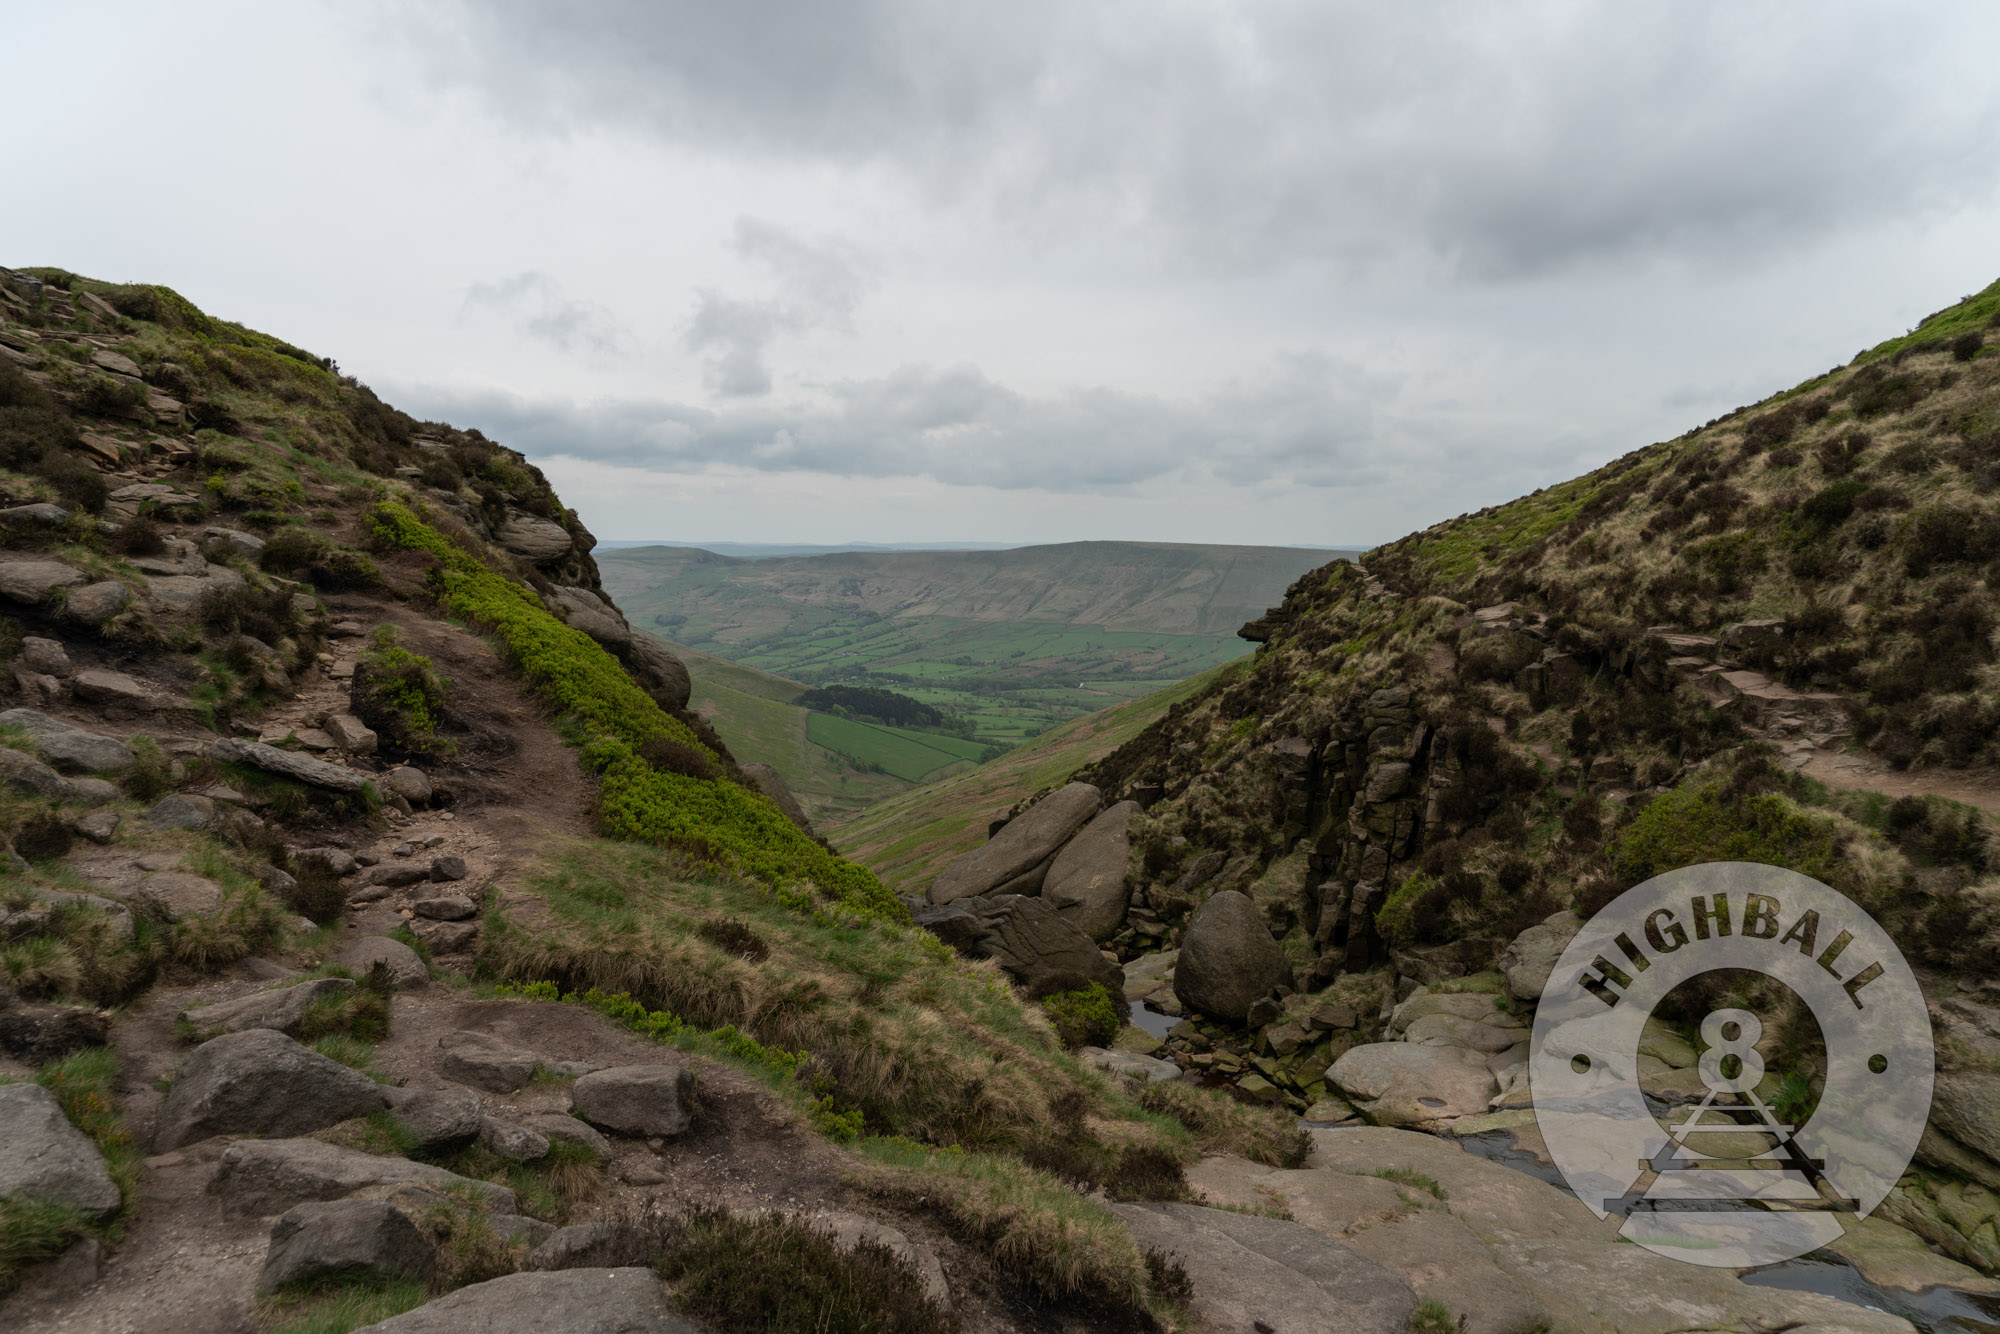 Looking south over the Vale of Edale from the southeast corner of Kinder Scout, Peak District, Derbyshire, England, UK, 2018.